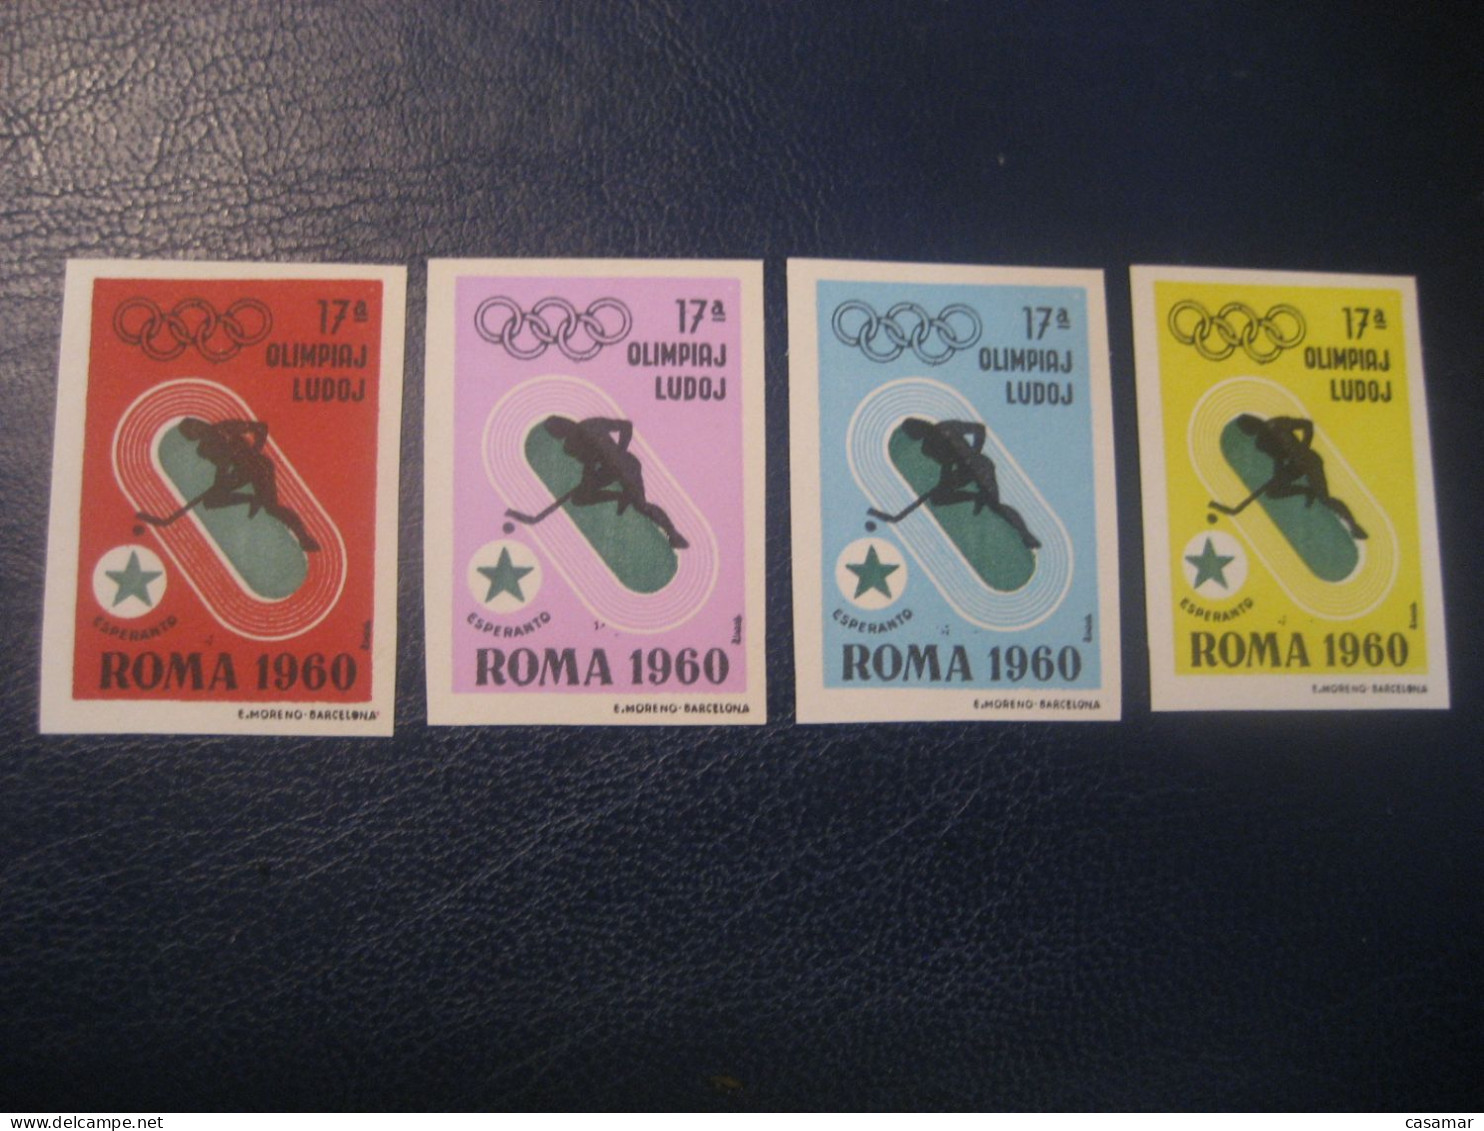 ROMA 1960 Ice Hockey Sur Glace Olympic Games Olympics Esperanto 4 Imperforated Poster Stamp Vignette ITALY Spain Label - Jockey (sobre Hielo)